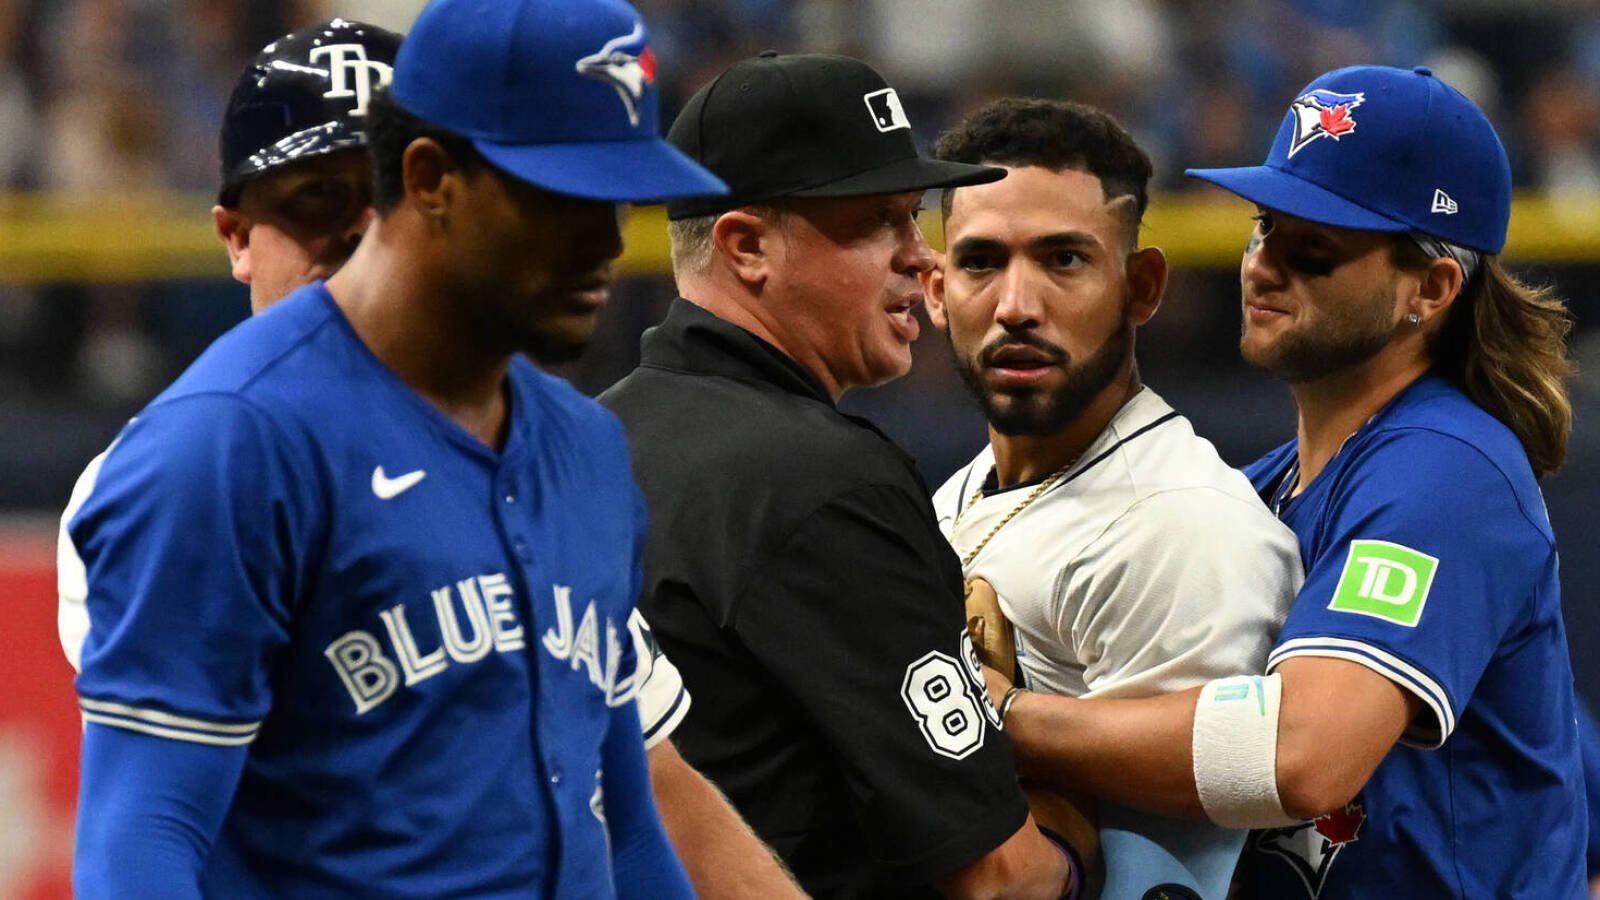 Benches clear after Blue Jays LHP shoves Rays player in face